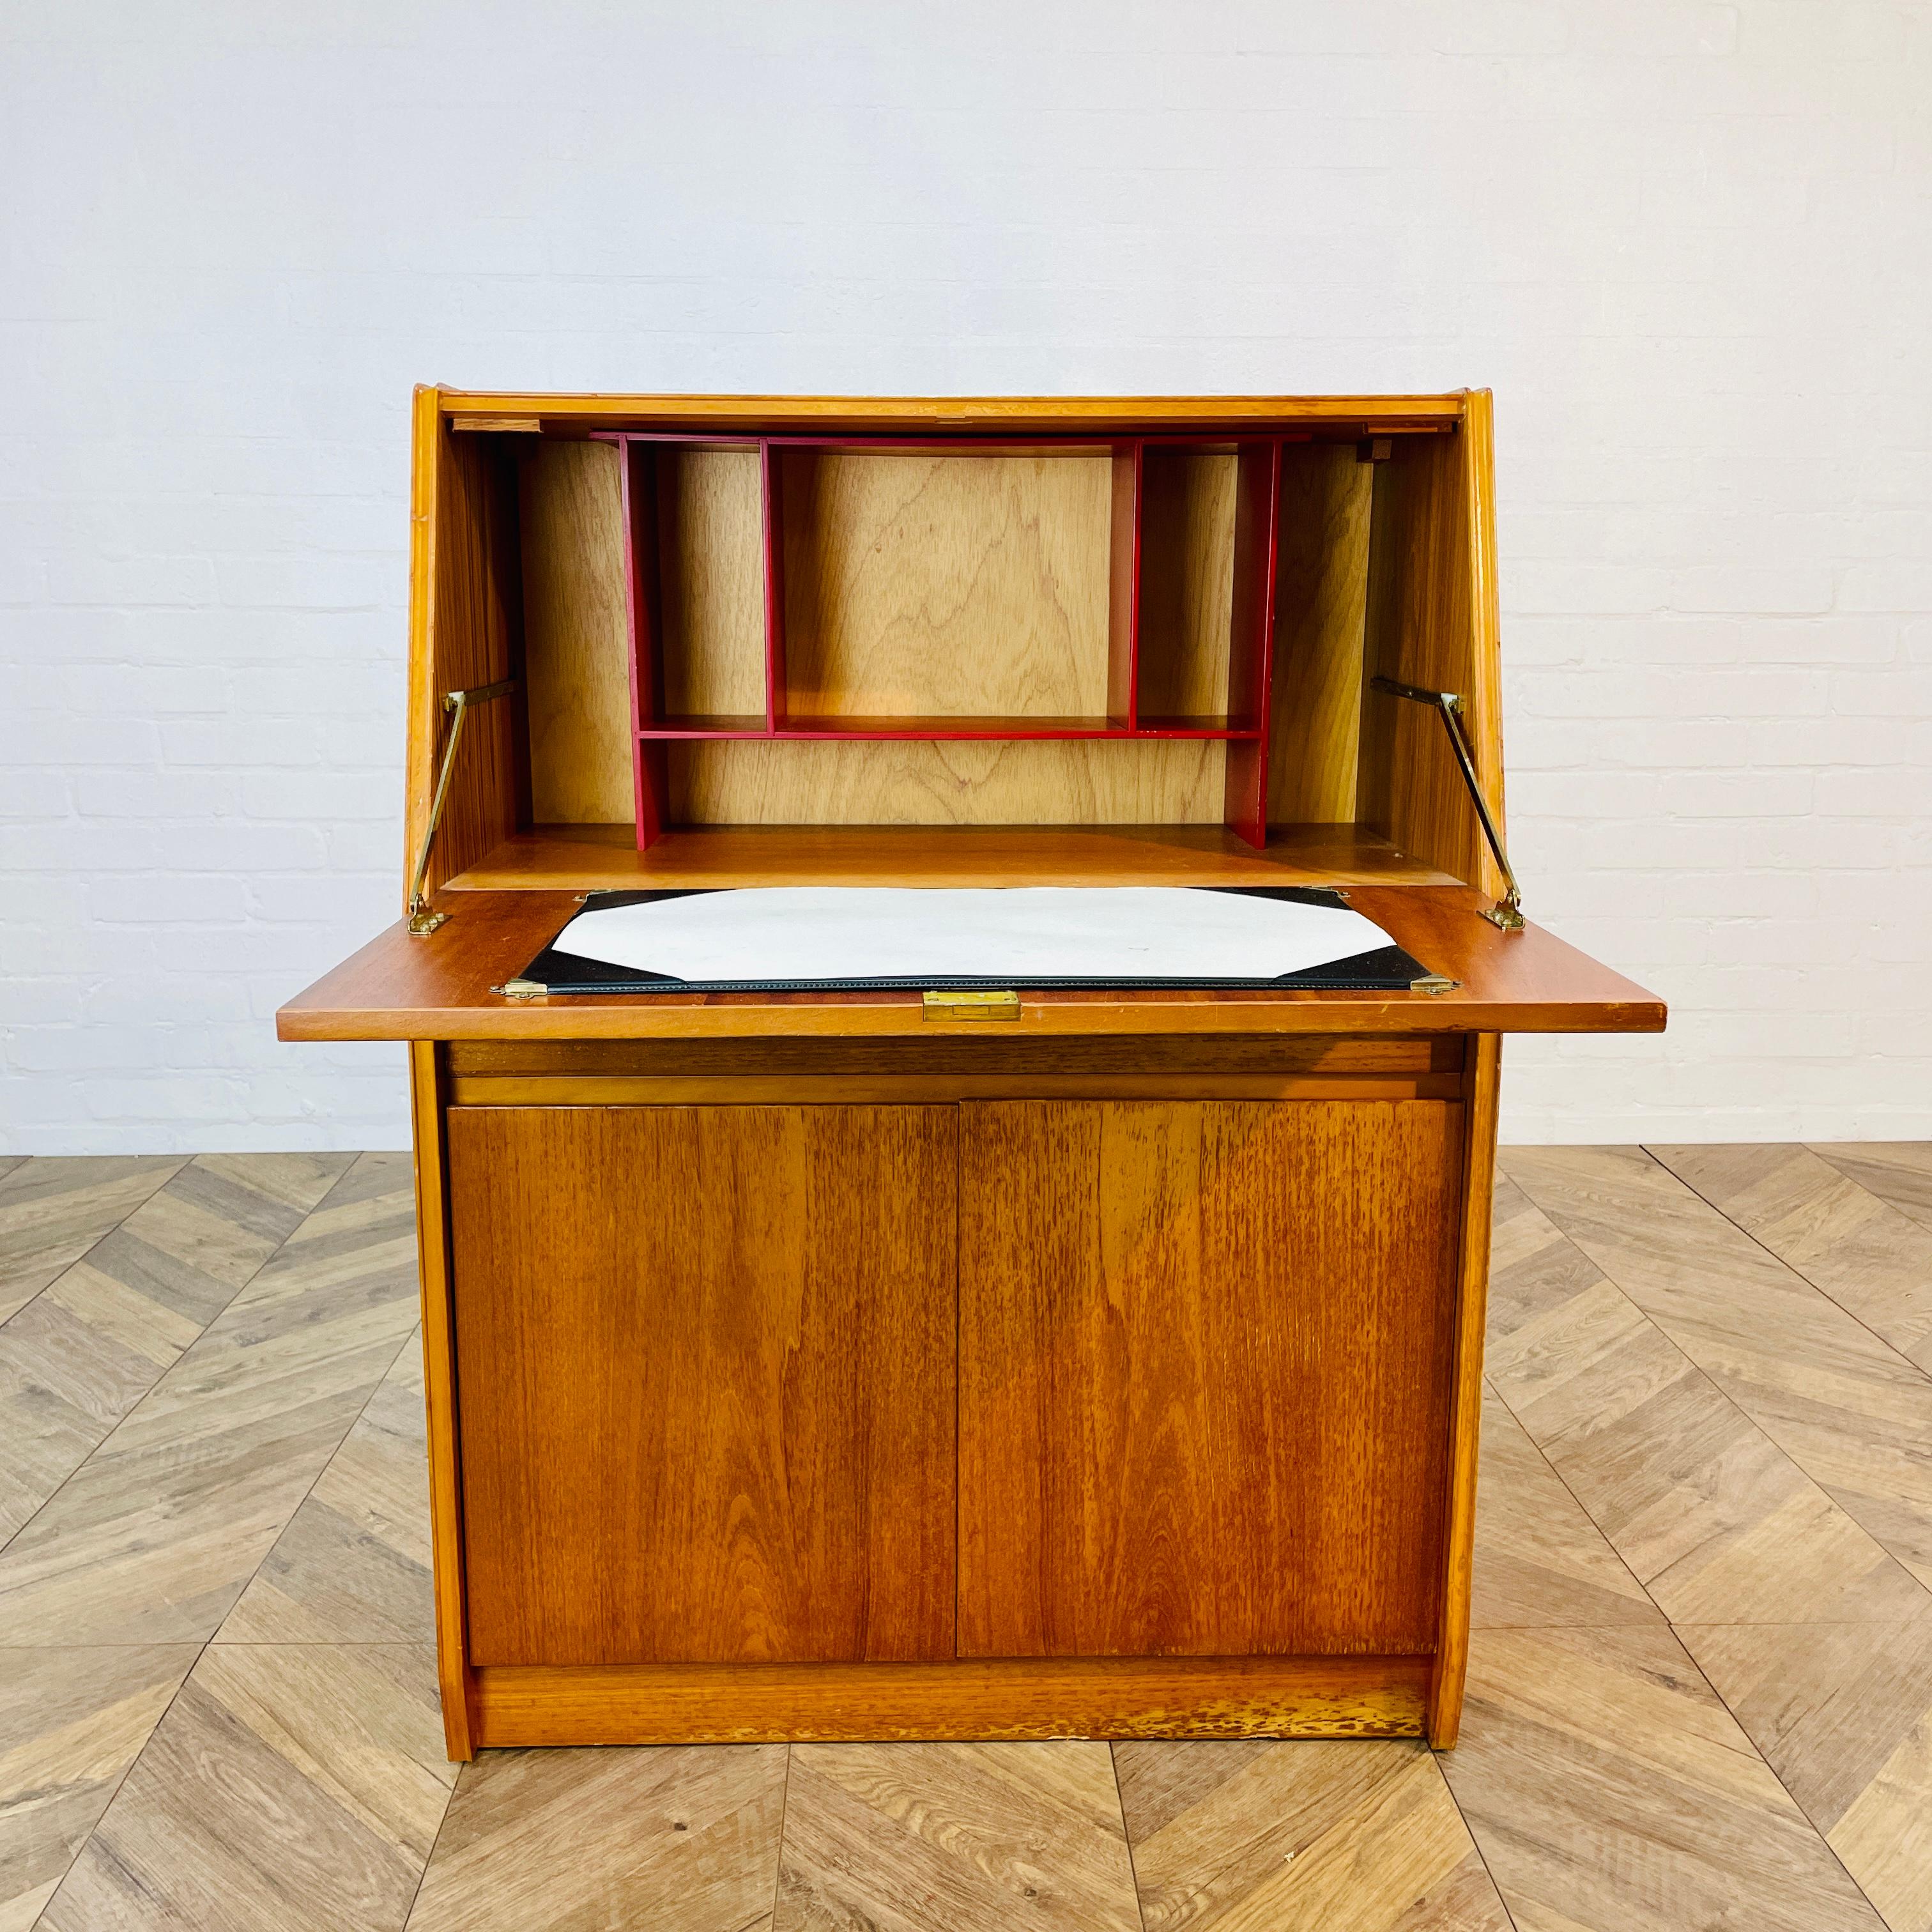 Mid Century, Teak Bureau / Desk Made by Remploy - 1970s.

The bureau has 1 drop-down writing desk, 1 single drawer and 2 cupboard doors.

The cabinet does show signs of wear to the corners, in-keeping with its age and usage but is structurally